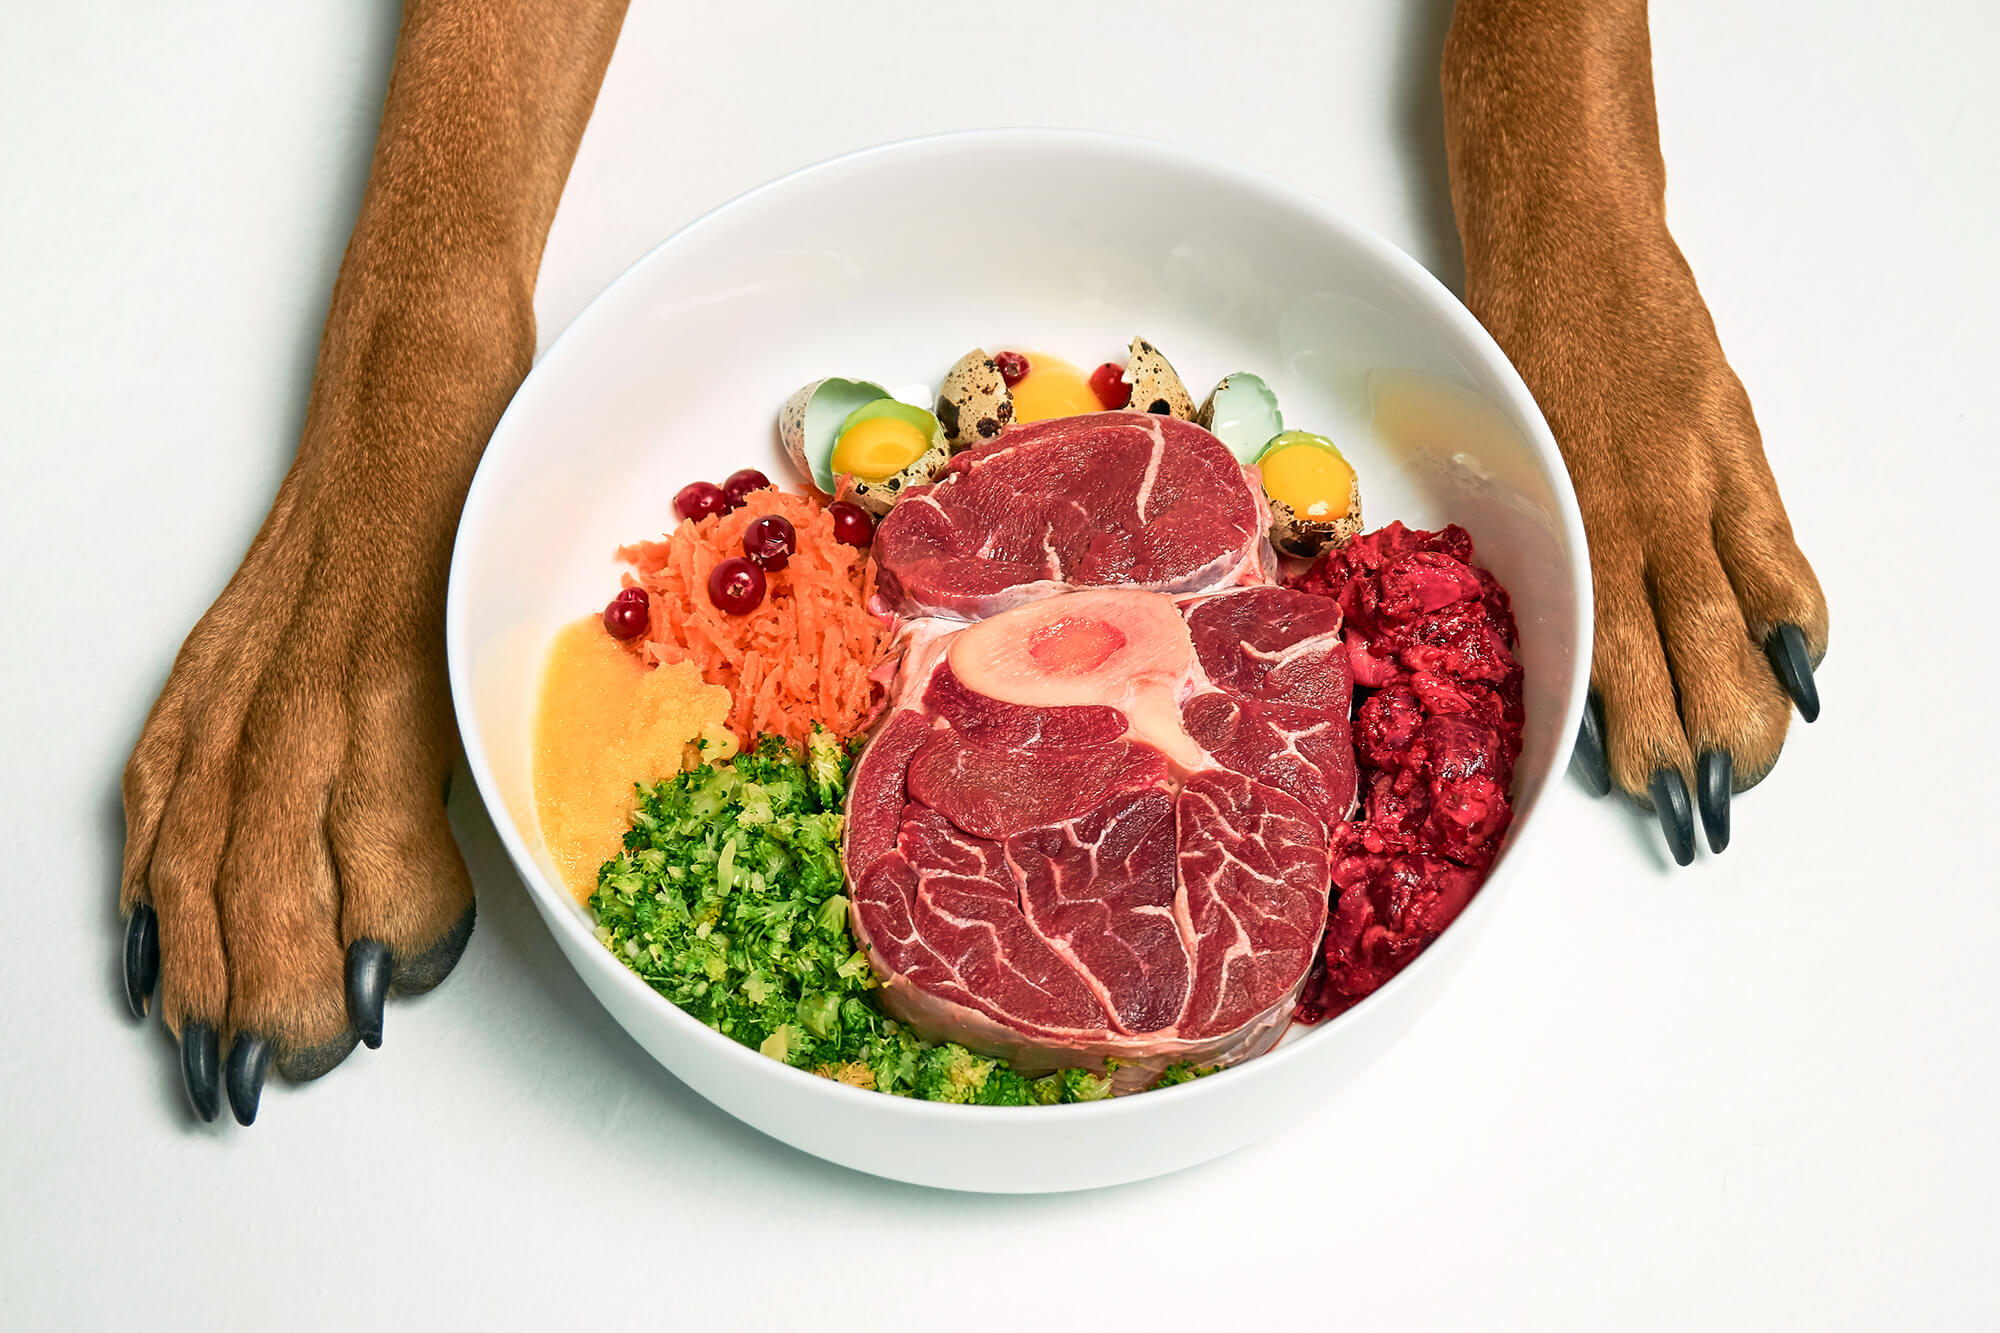 Is feeding raw food safe for your pets?